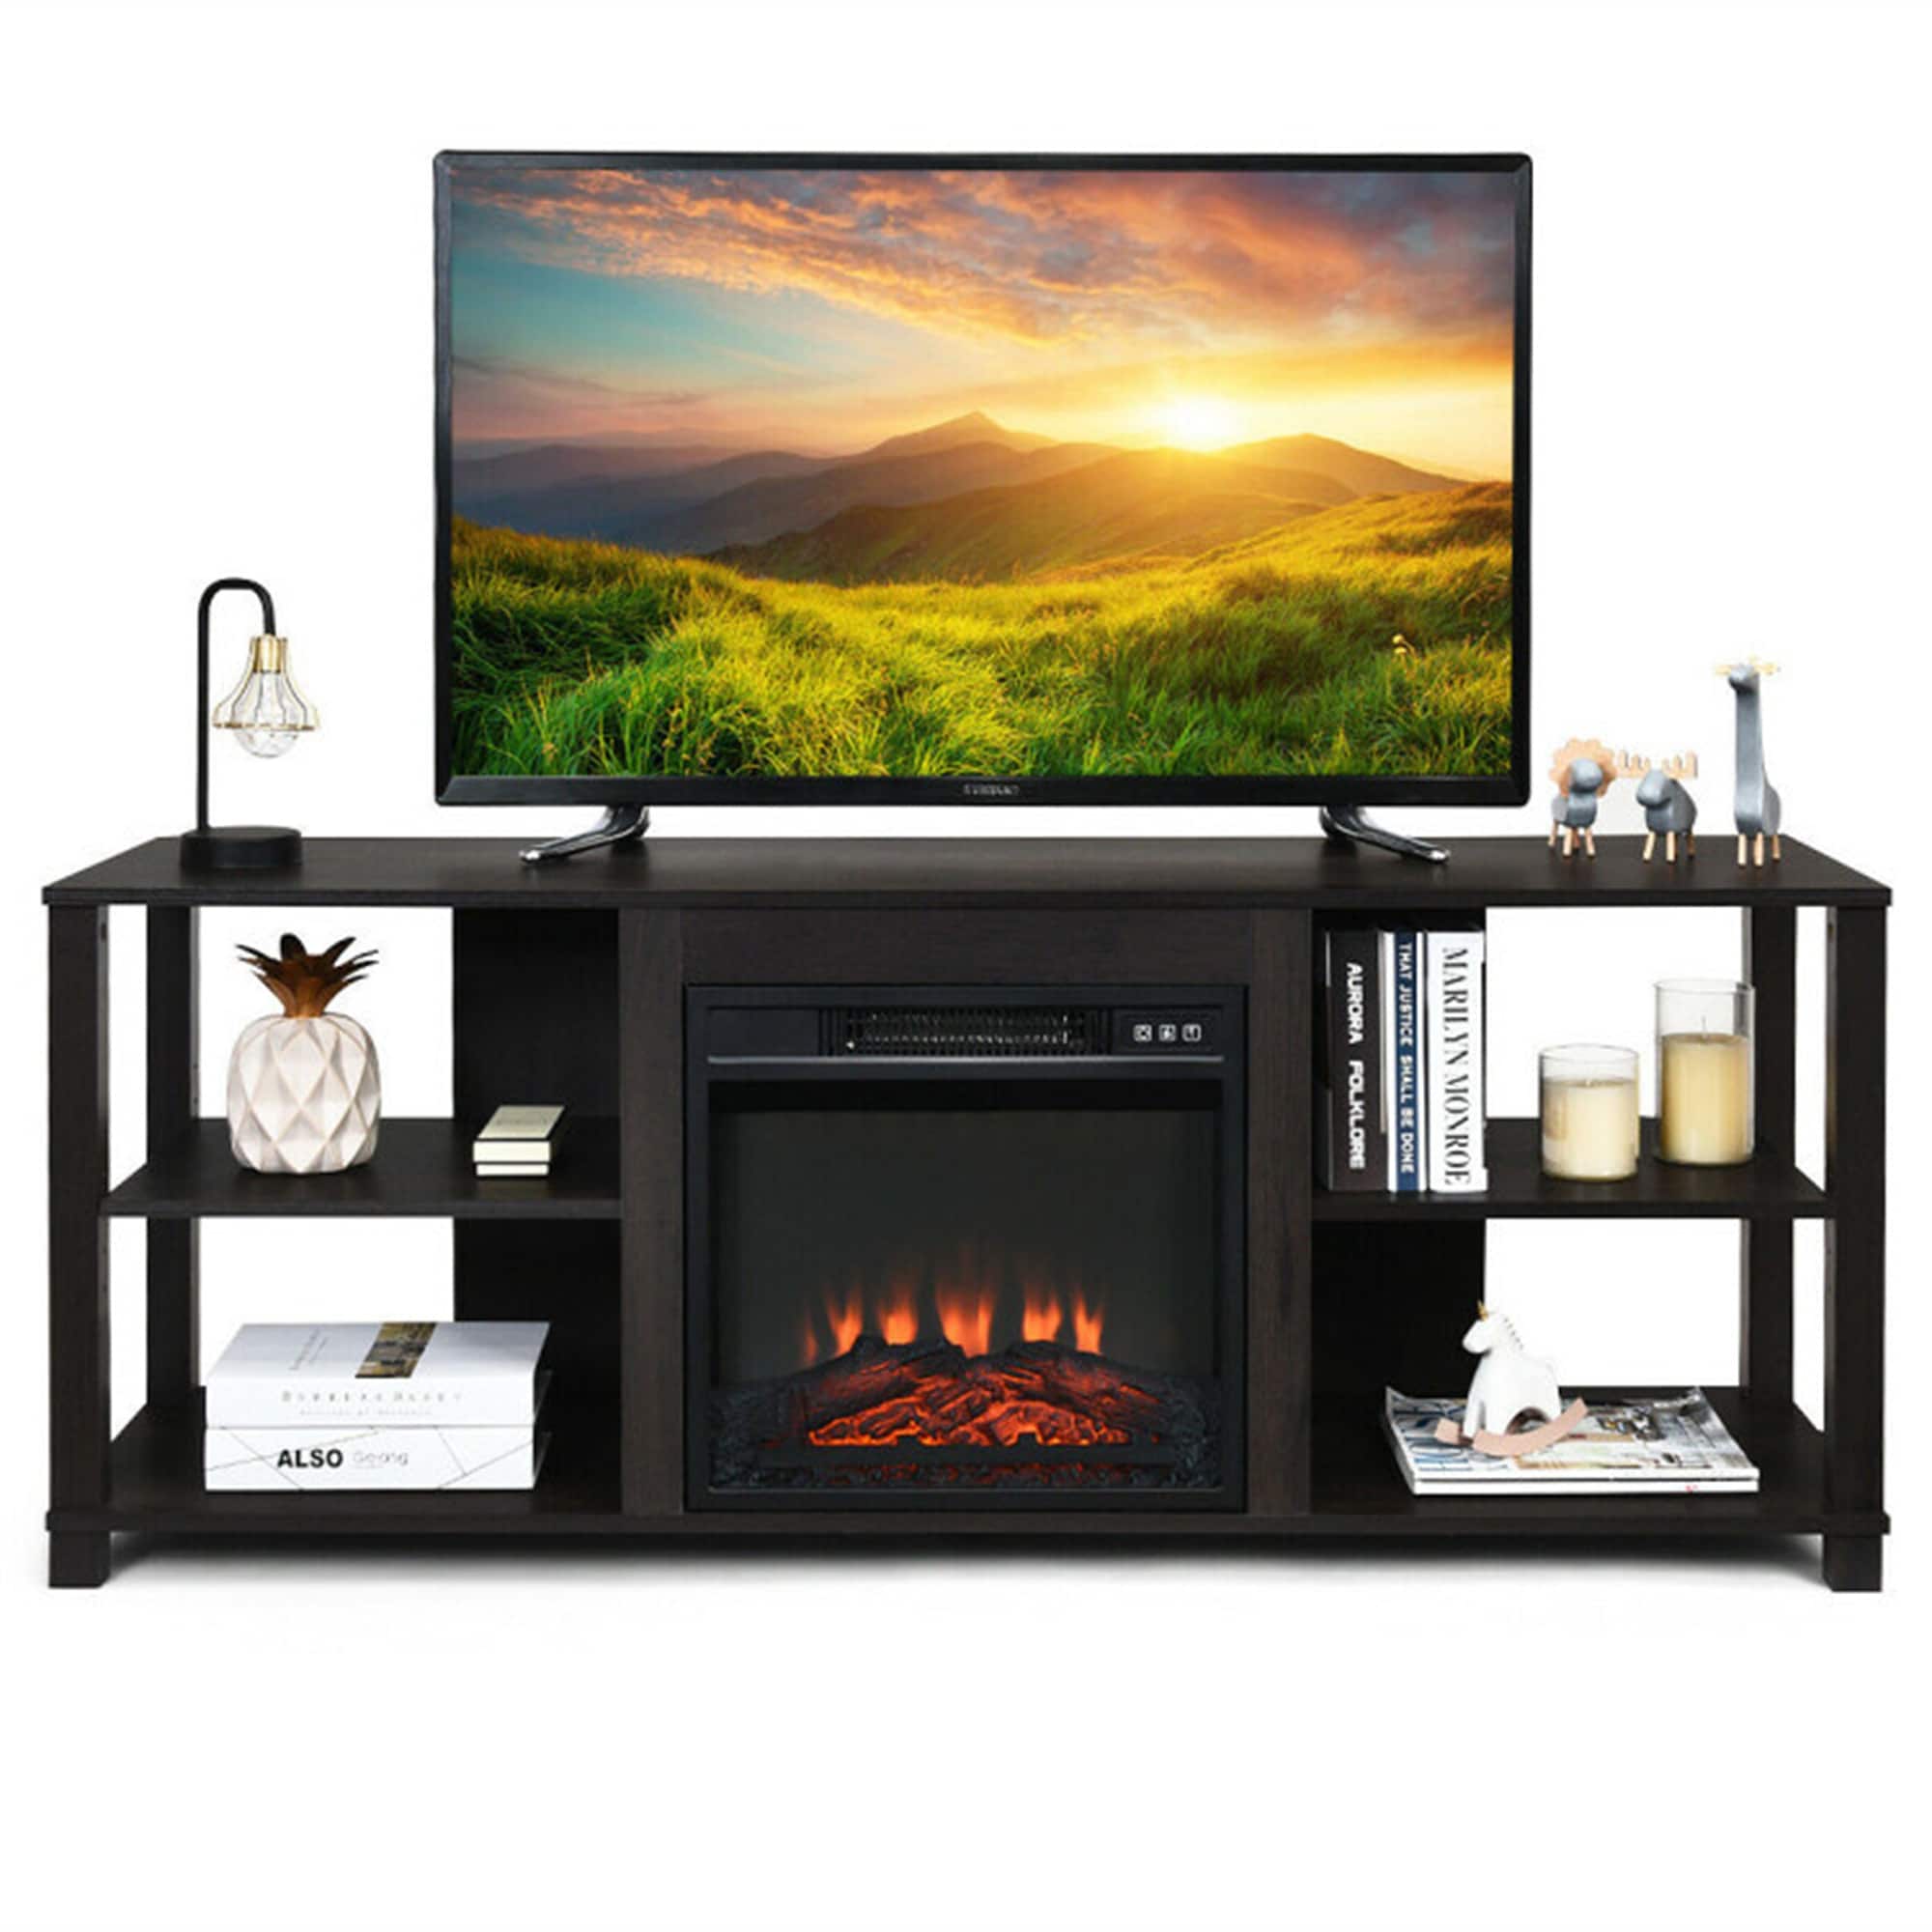 BESTCOSTY 2-Tier TV Storage Cabinet Console to insert electric fireplace